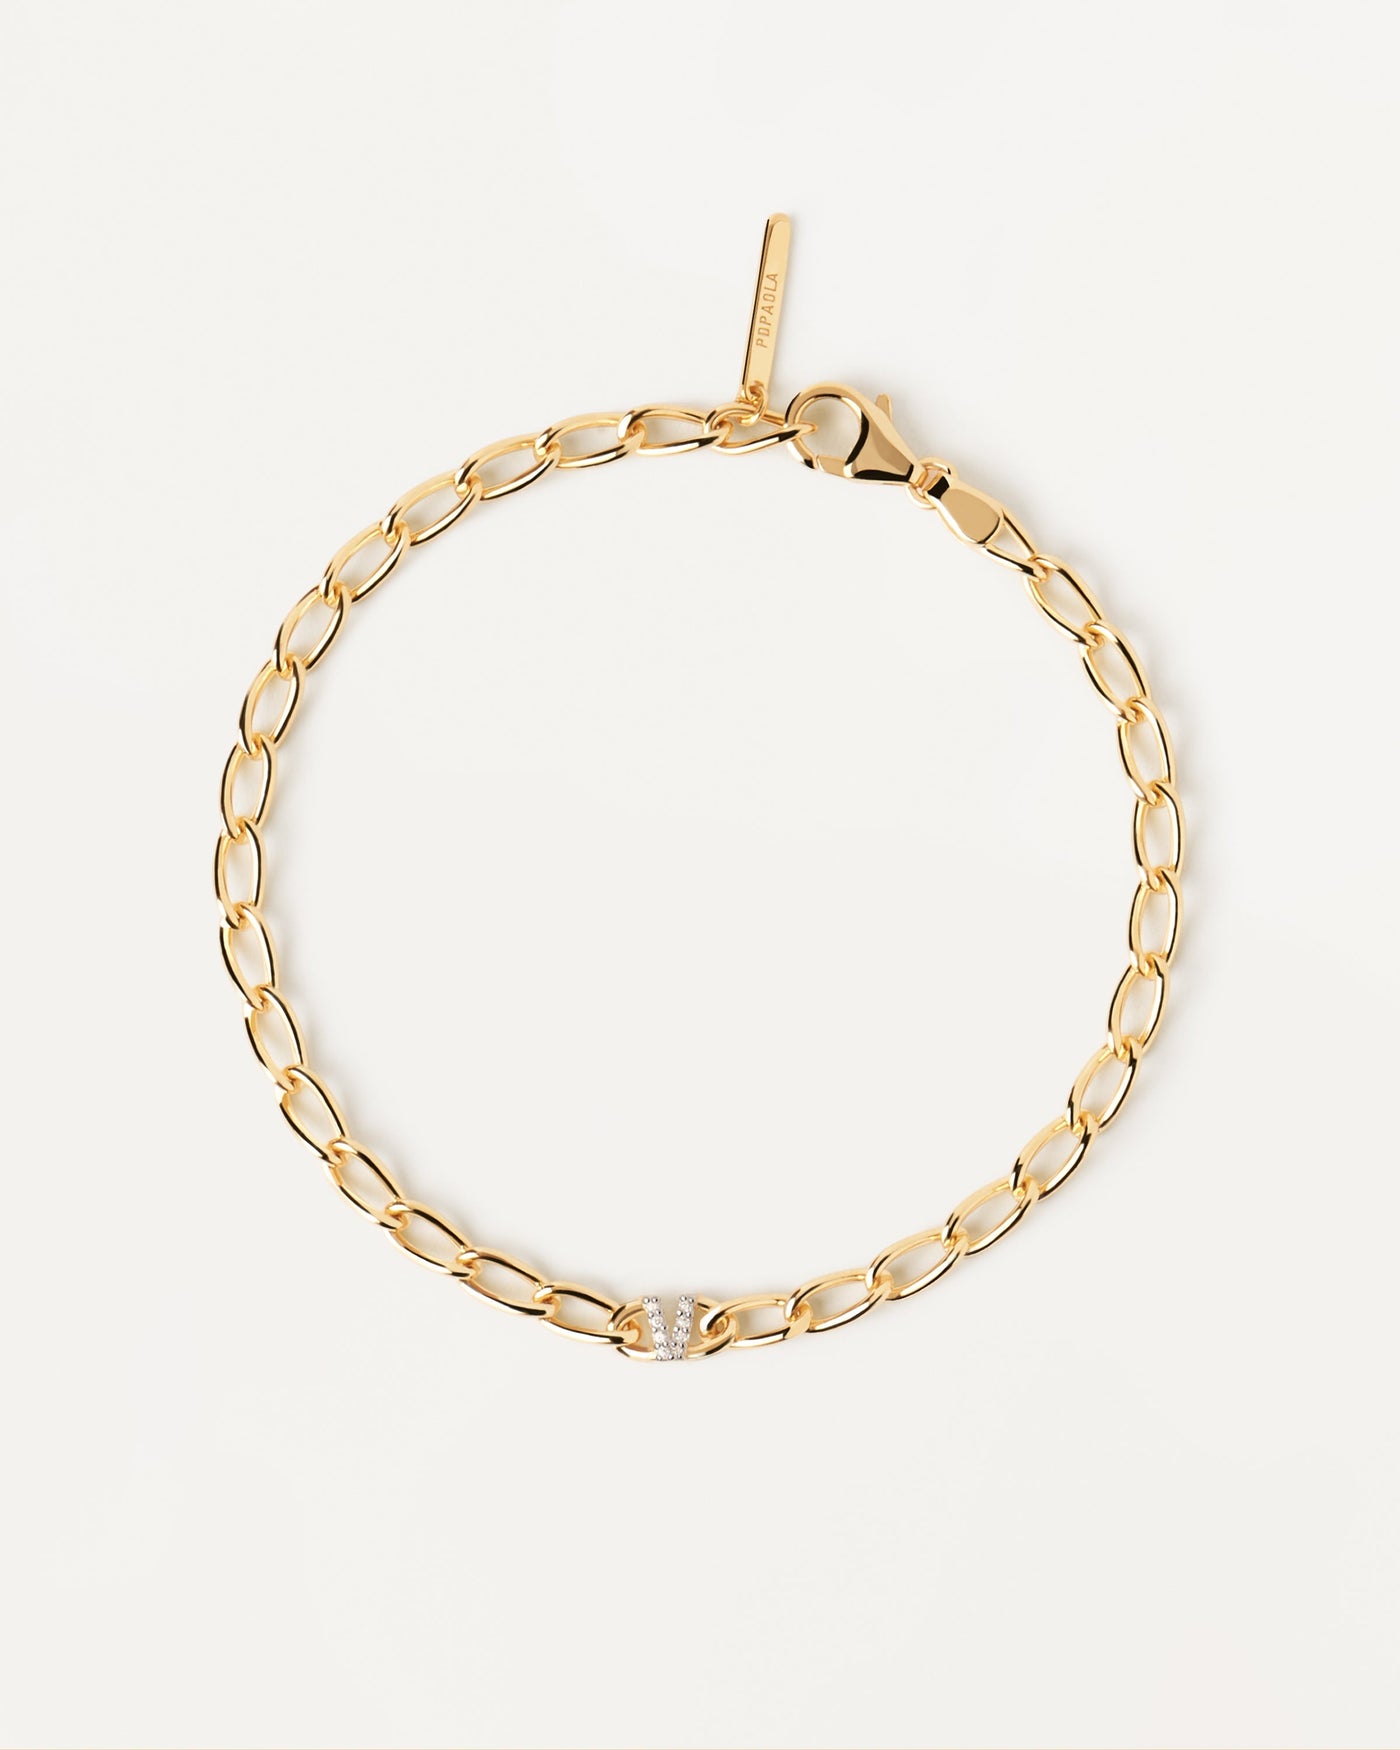 2023 Selection | Letter V Chain Bracelet. cable chain bracelet in gold-plated silver with initial V in zirconia. Get the latest arrival from PDPAOLA. Place your order safely and get this Best Seller. Free Shipping.